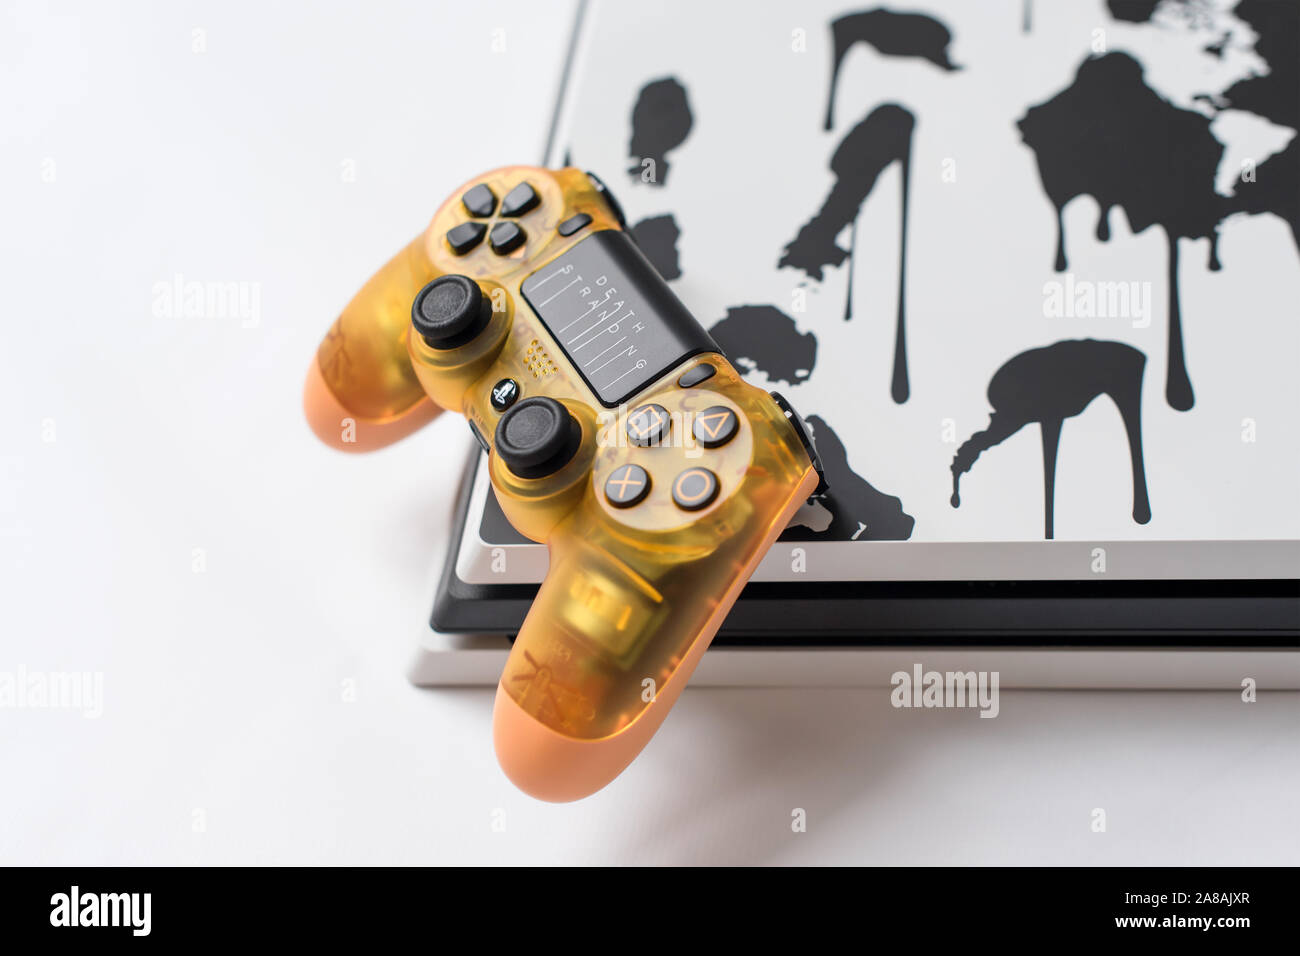 KIEV, UKRAINE - November 07, 2019: Death Stranding Limited Edition PS4 Pro.  Sony PlayStation 4 game console and transparent controller on white Stock  Photo - Alamy